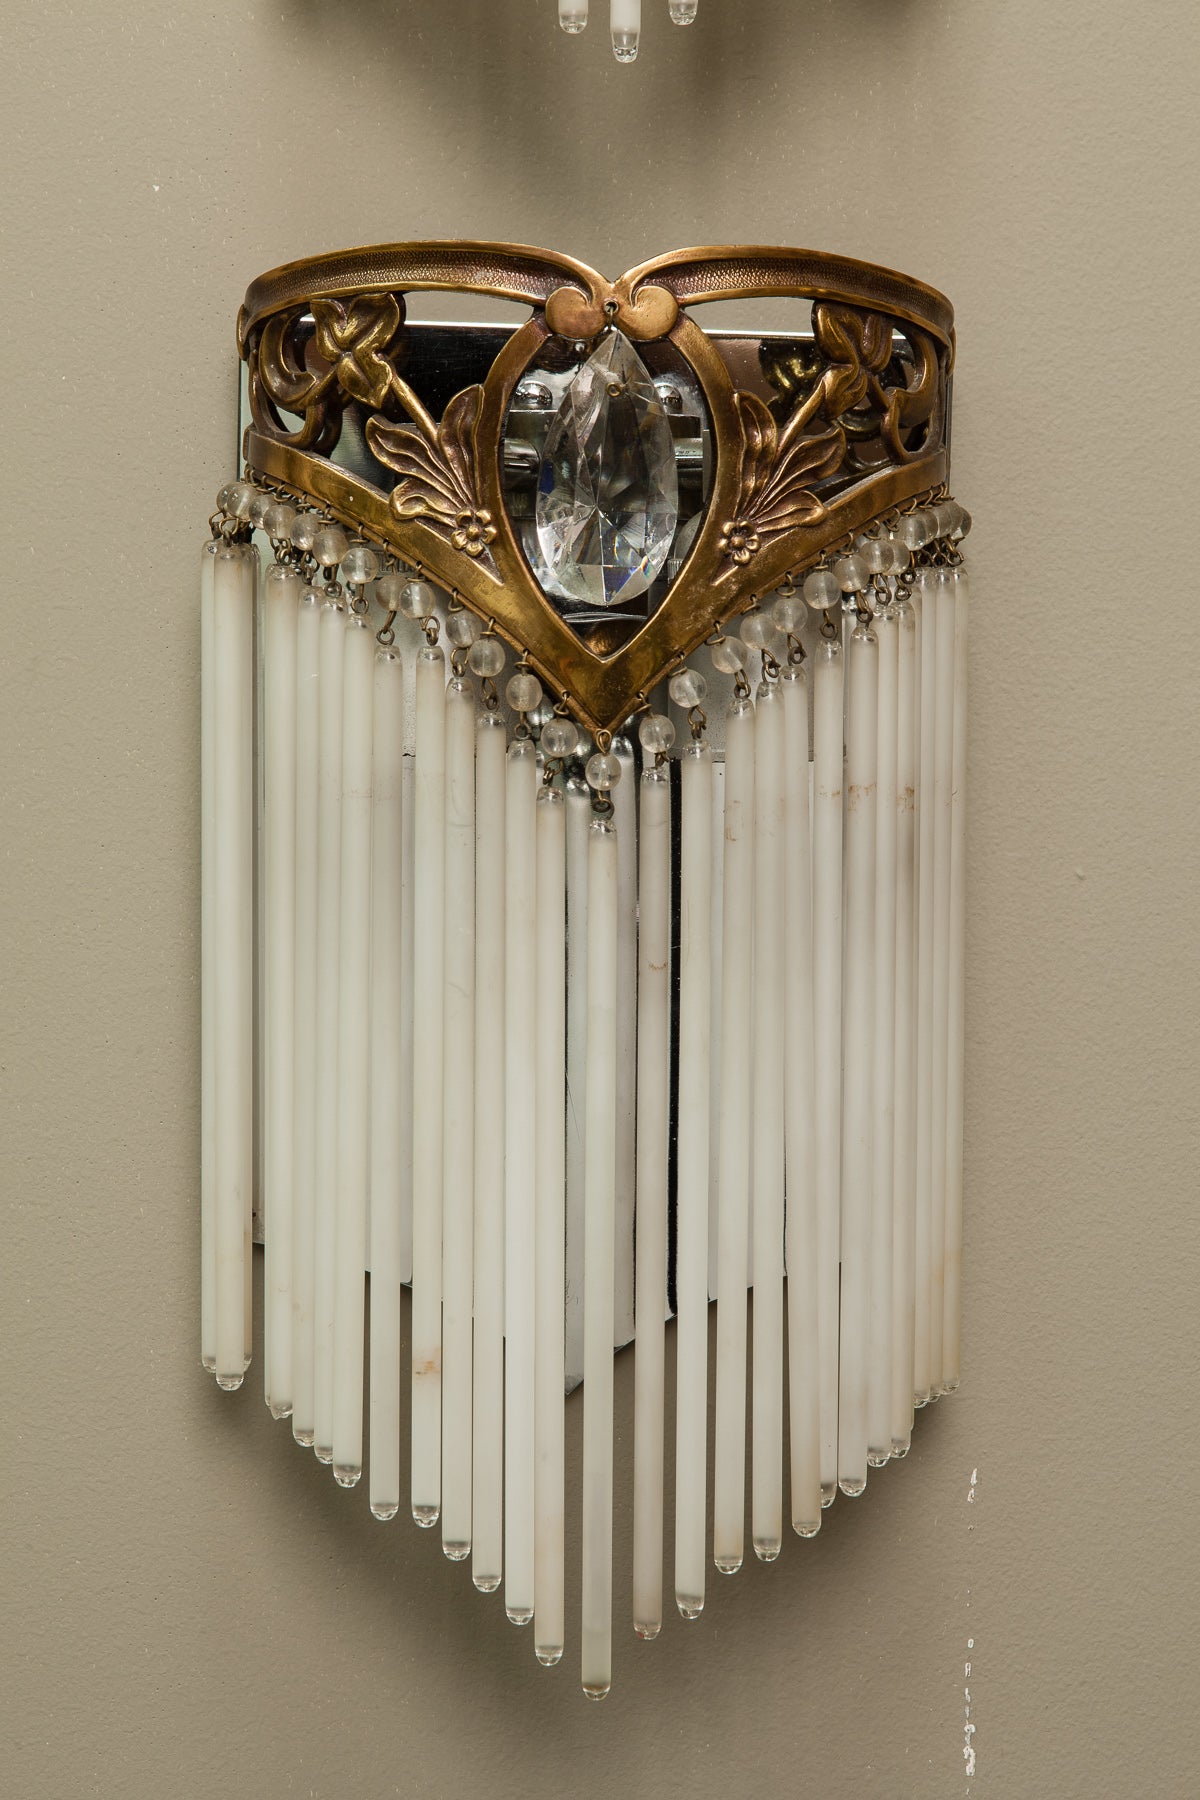 Pair of Art Nouveau Bronze and Crystal Sconces with Suspended Glass Rods